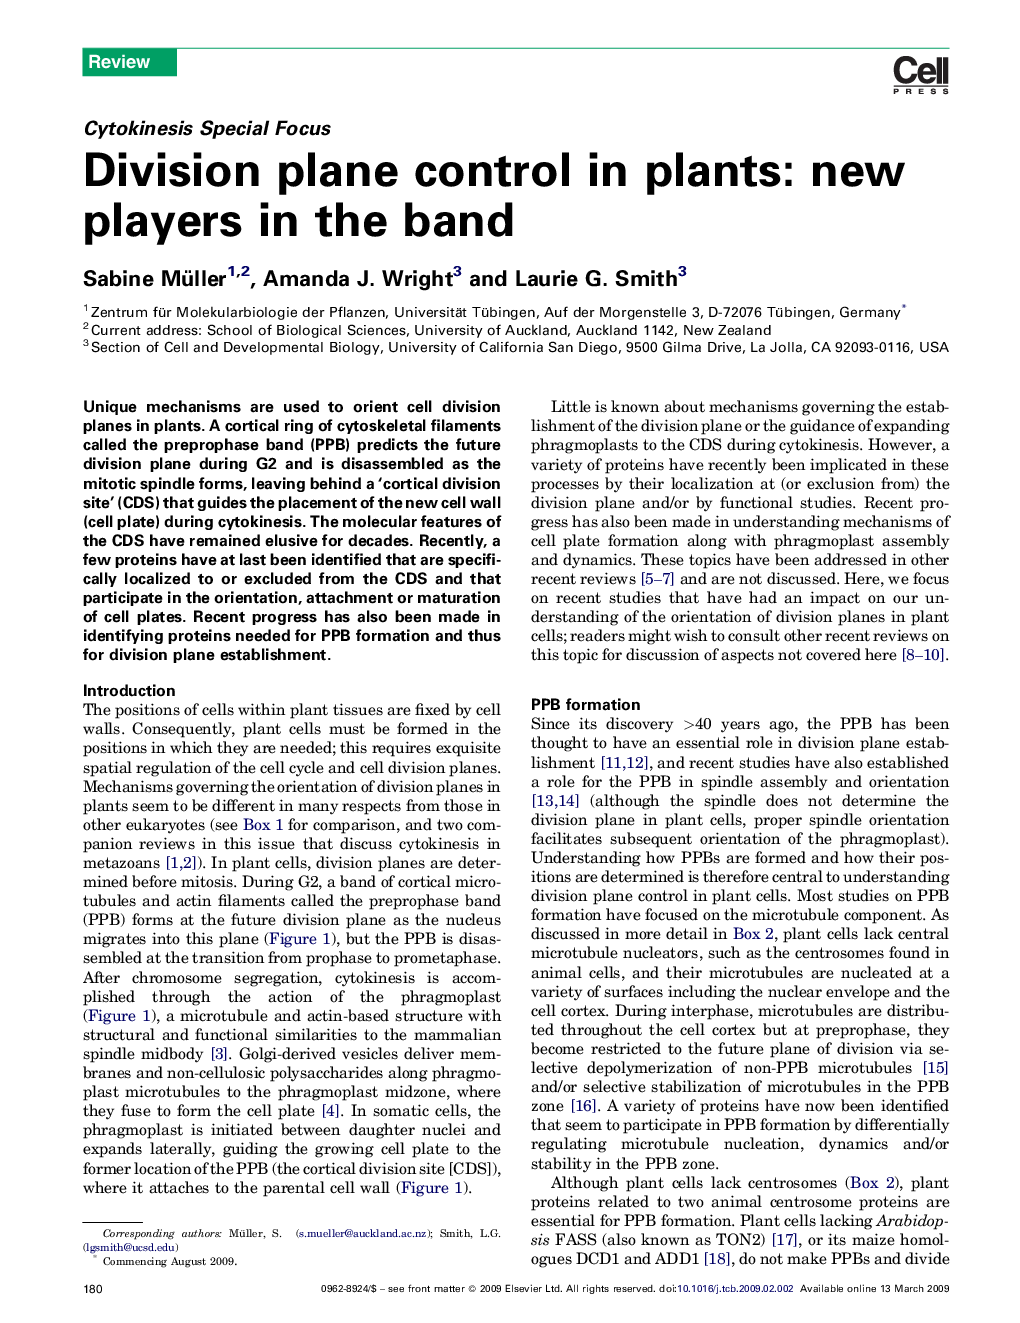 Division plane control in plants: new players in the band